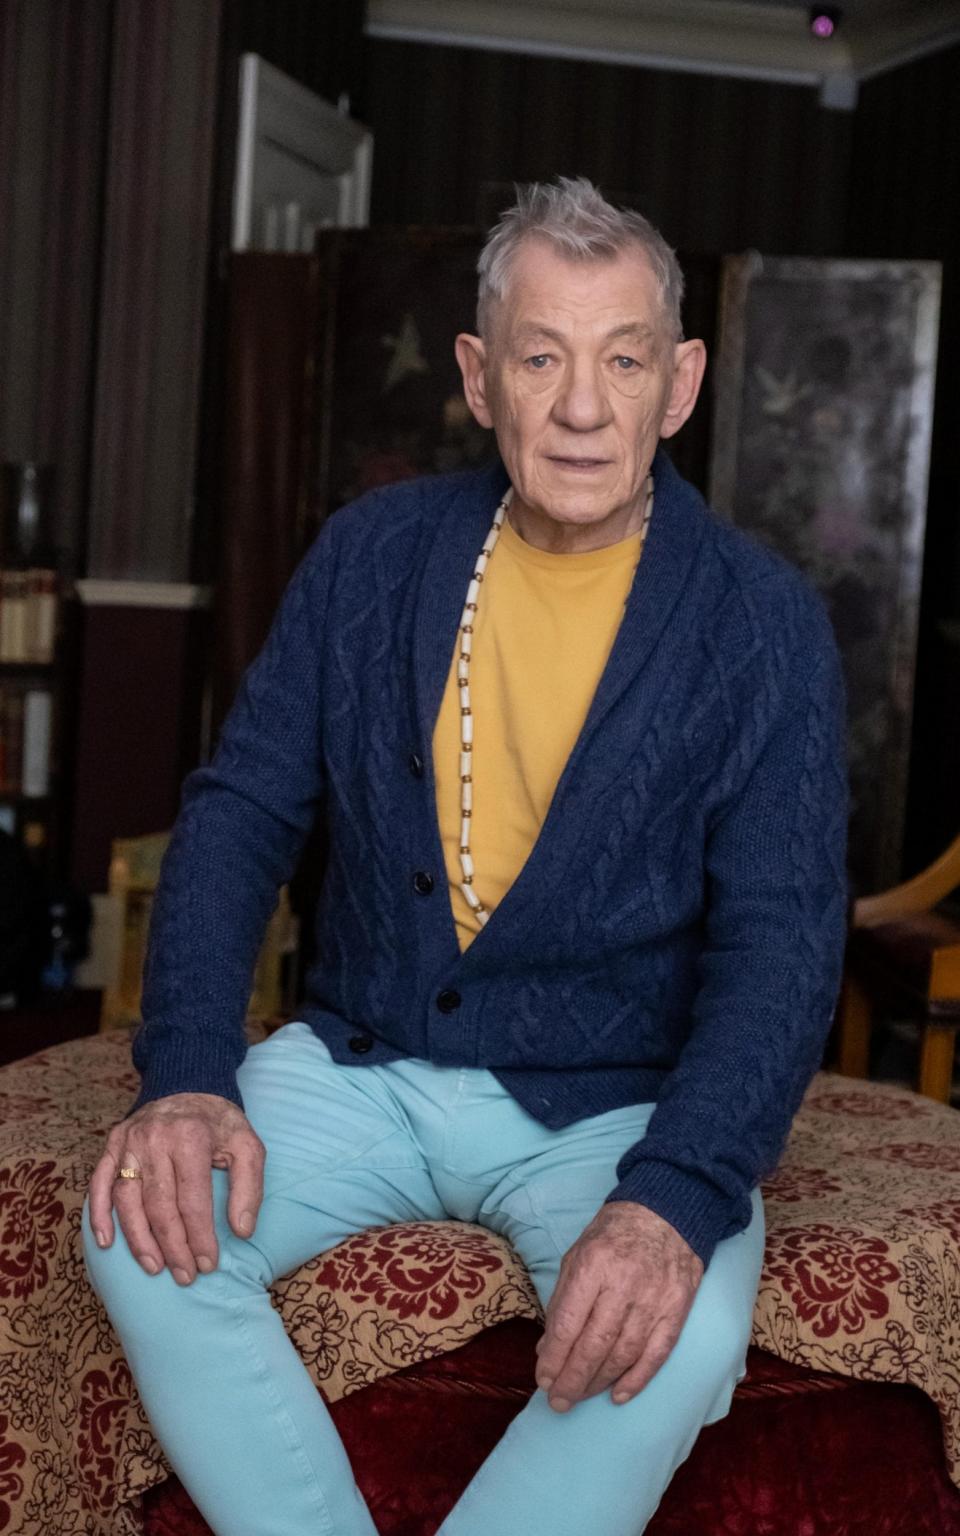 'I think the theatre will come back just as strong as ever': Ian McKellen at Theatre Royal, Windsor - Jack Merriman